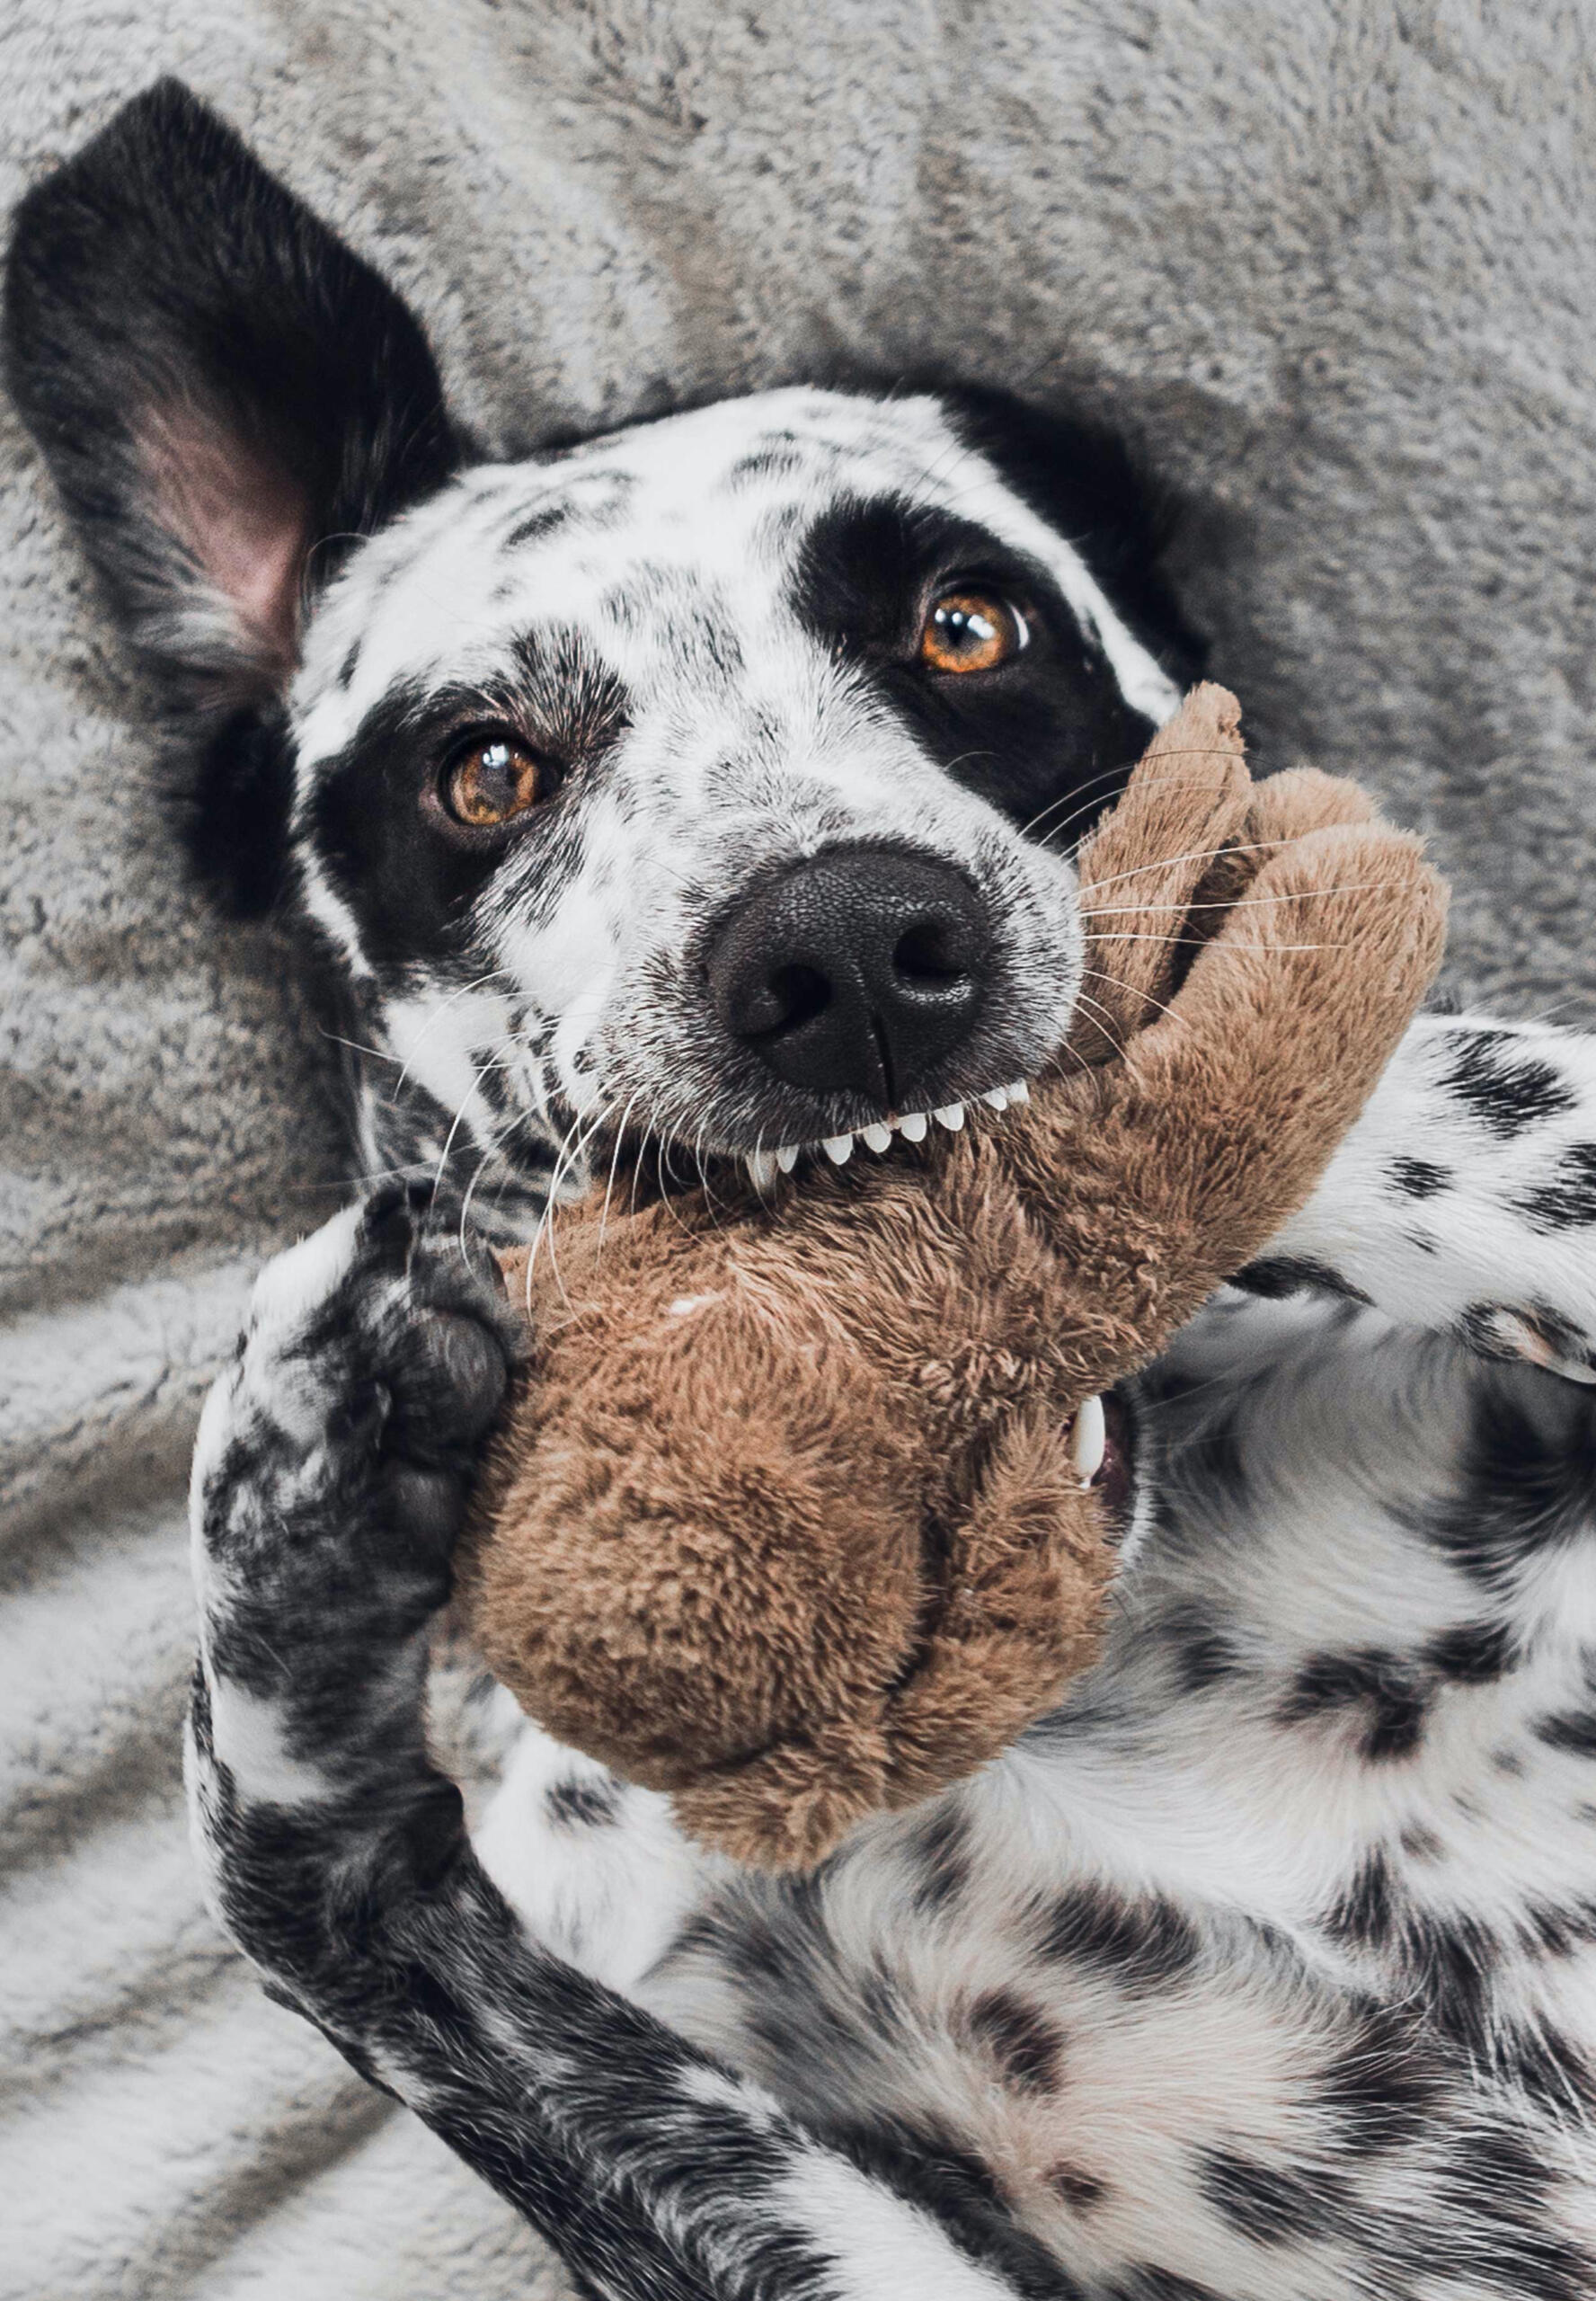 A black and white spotted dog playing with a brown stuffed animal chew toy.